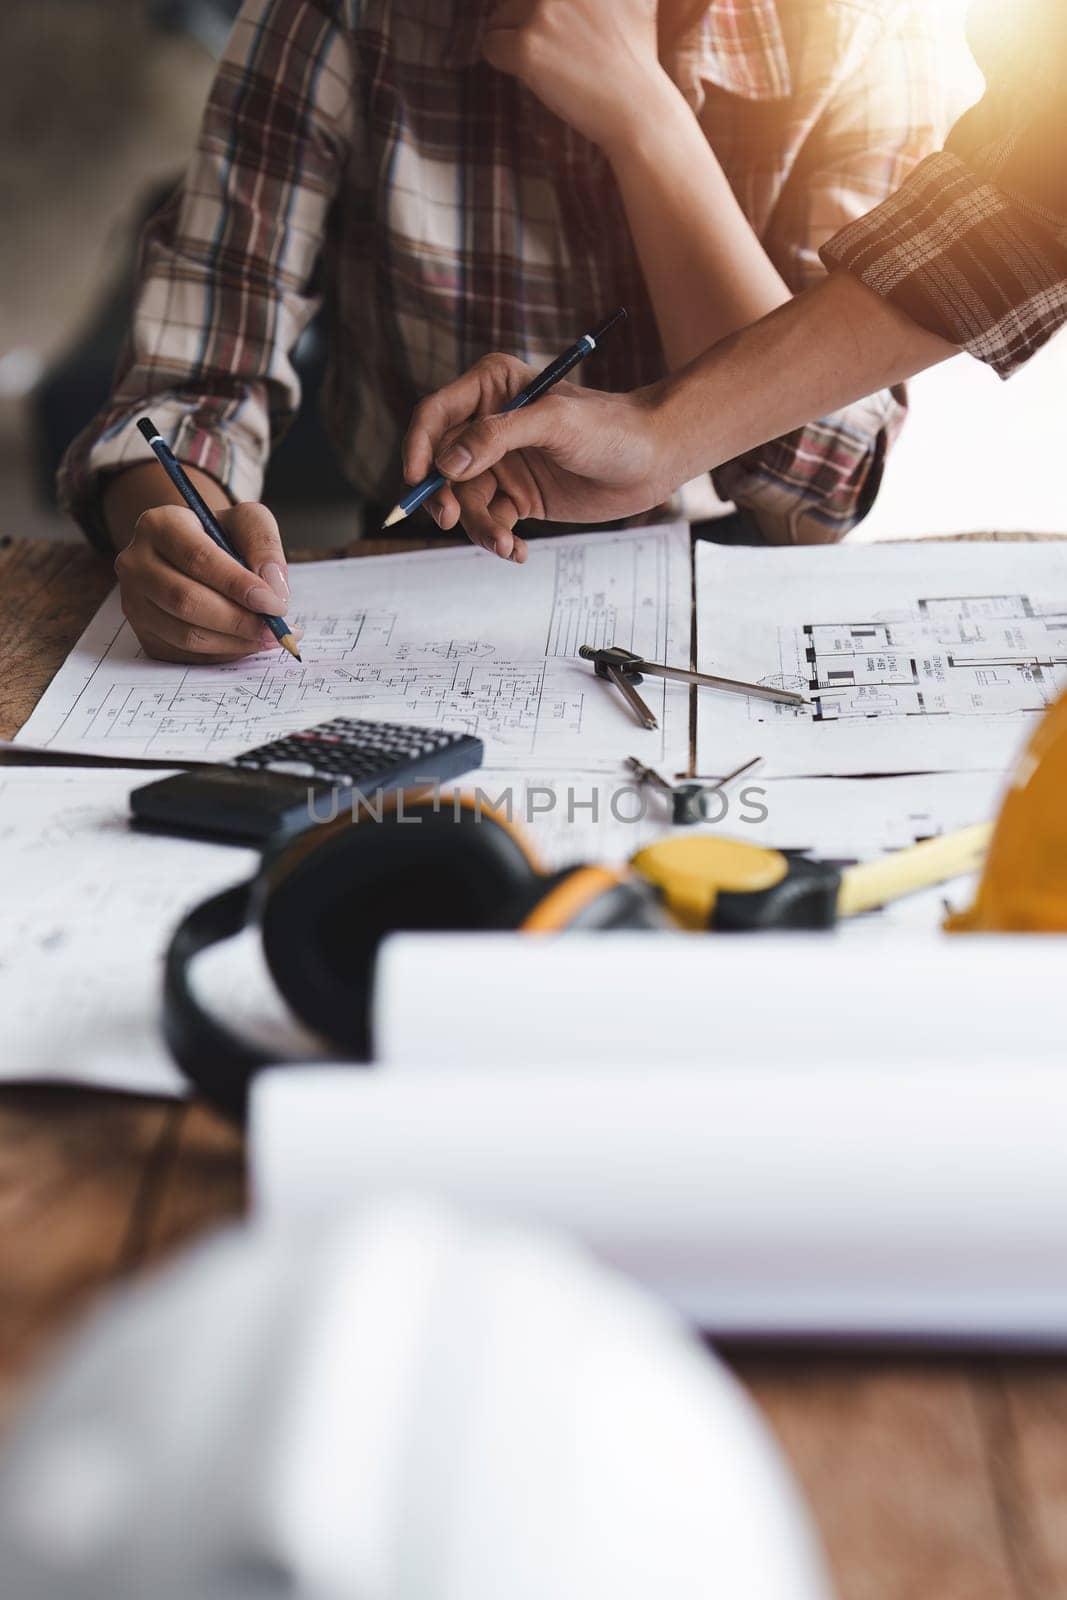 Architect and Engineer working with blueprints for architectural plan, engineer sketching a construction project, green energy concept.